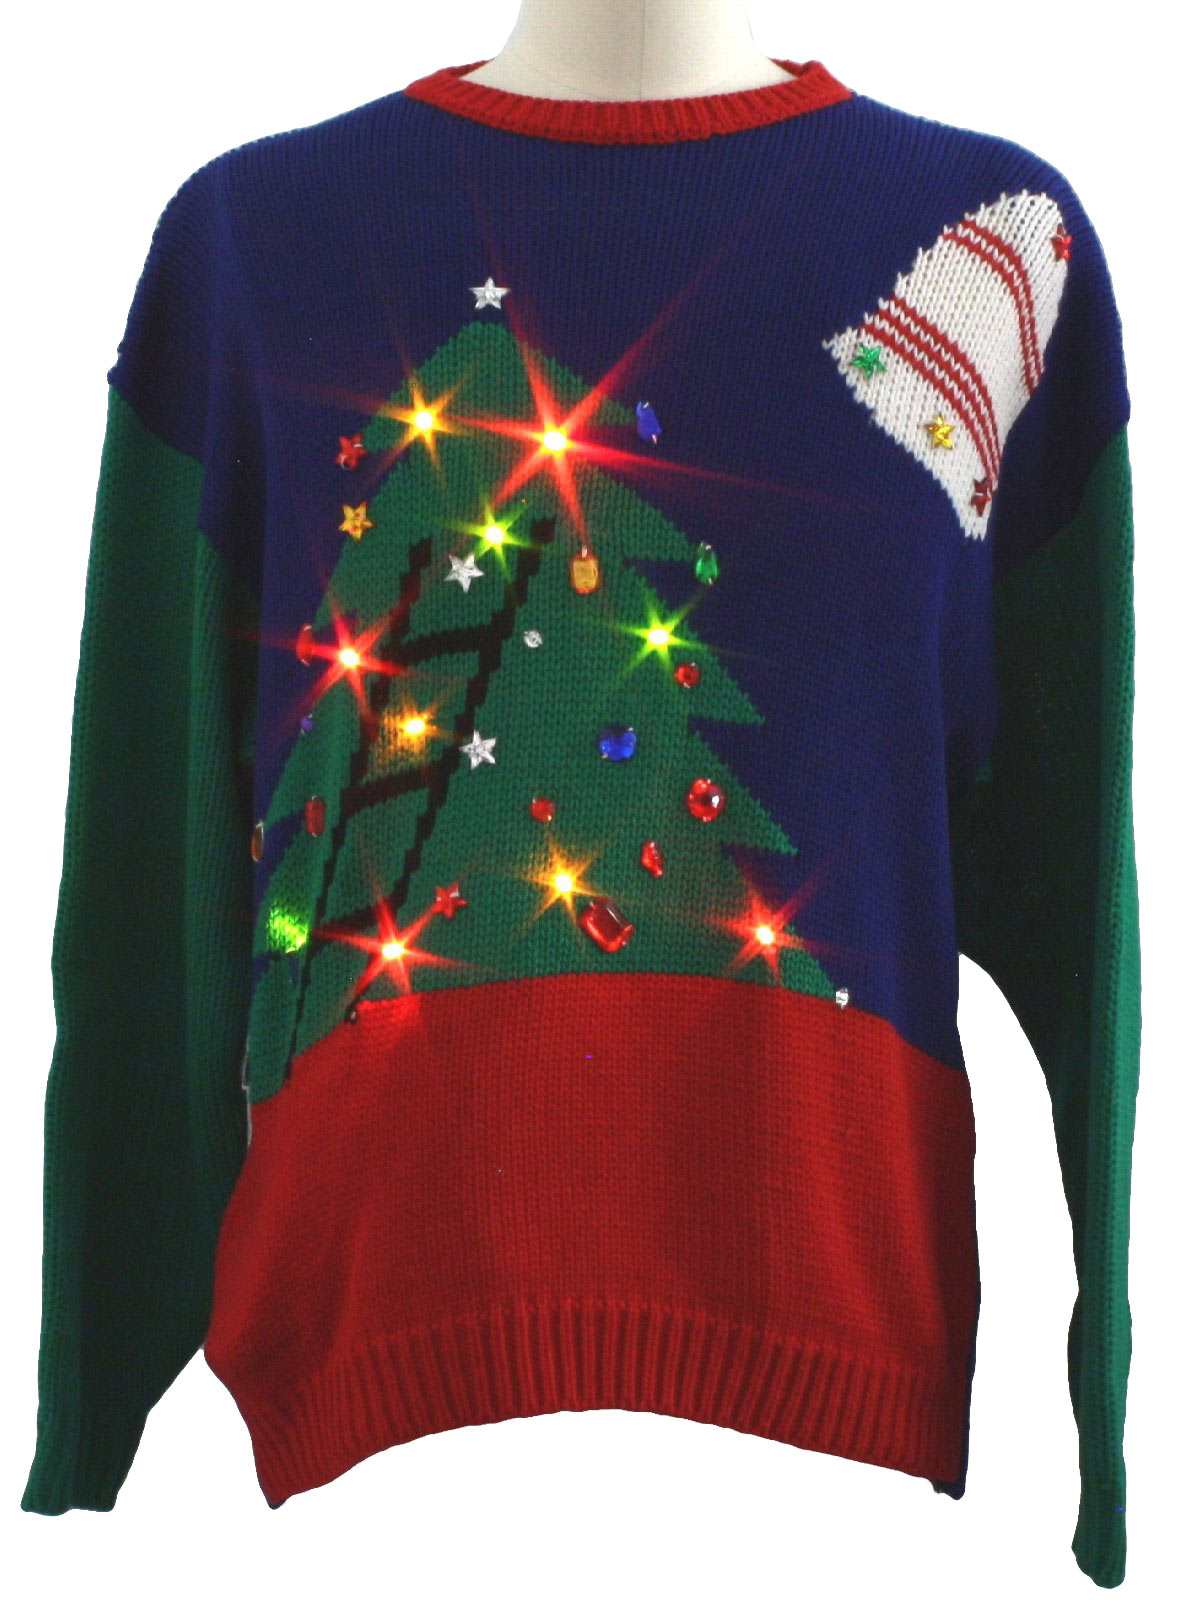 Lightup Ugly Christmas Sweater: 80s authentic vintage -Work in Progress ...